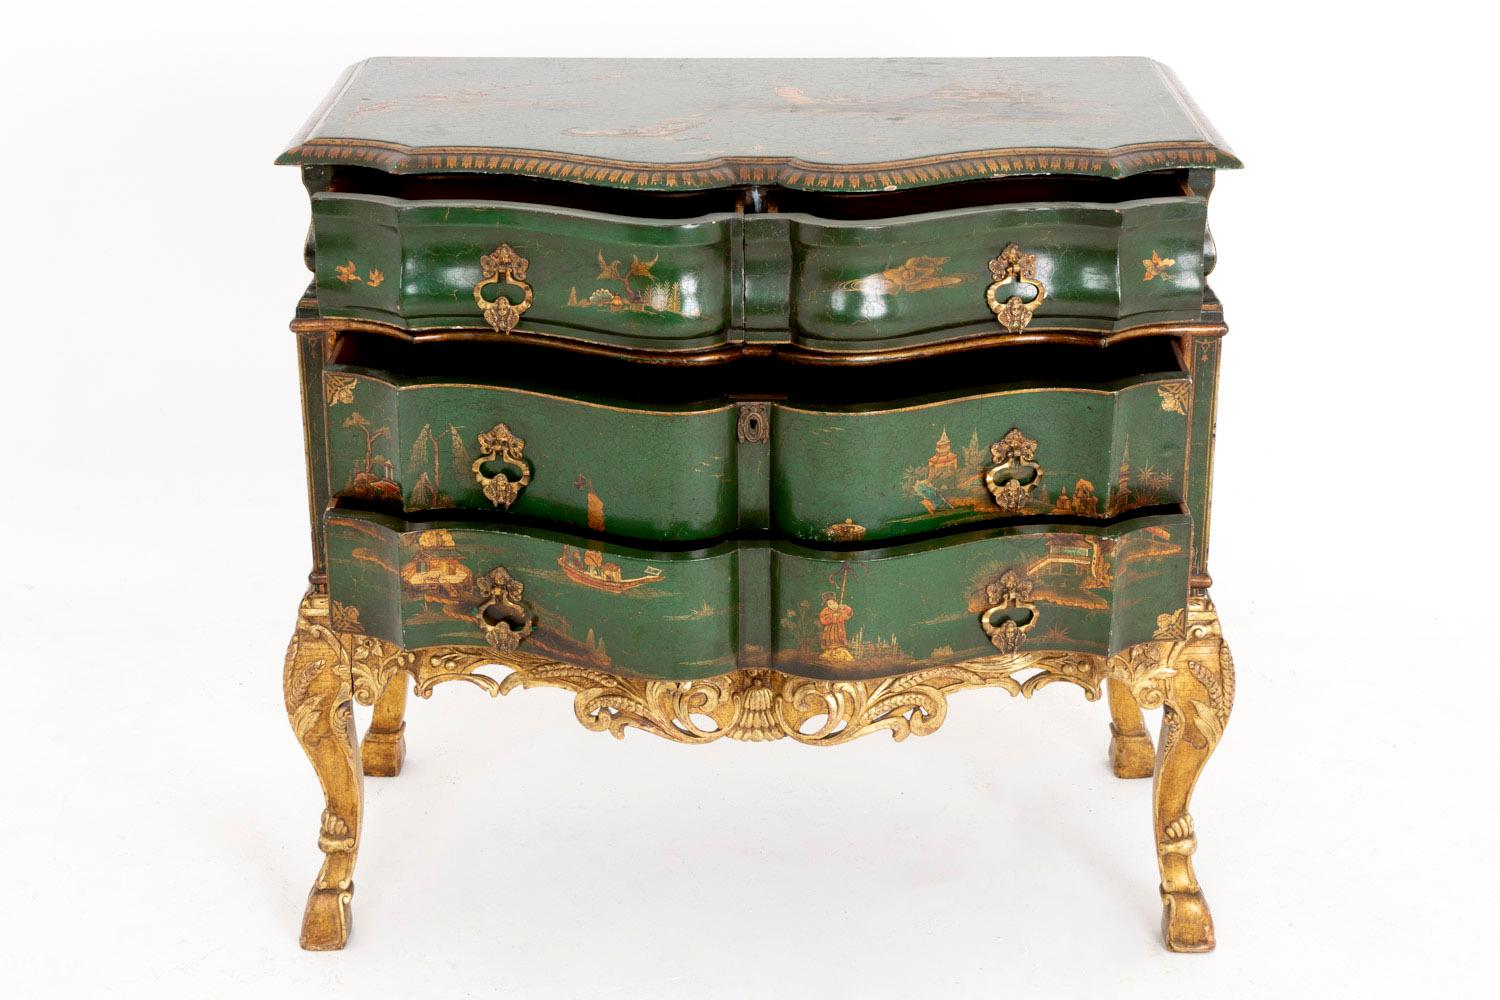 Serpentine commode or chest of drawers in carved and giltwood with green lacquer, opening with two large drawers in front topped by two smaller one.
Carved and giltwood stand made of console legs ending in a hoof, adorned on uprights with wreaths